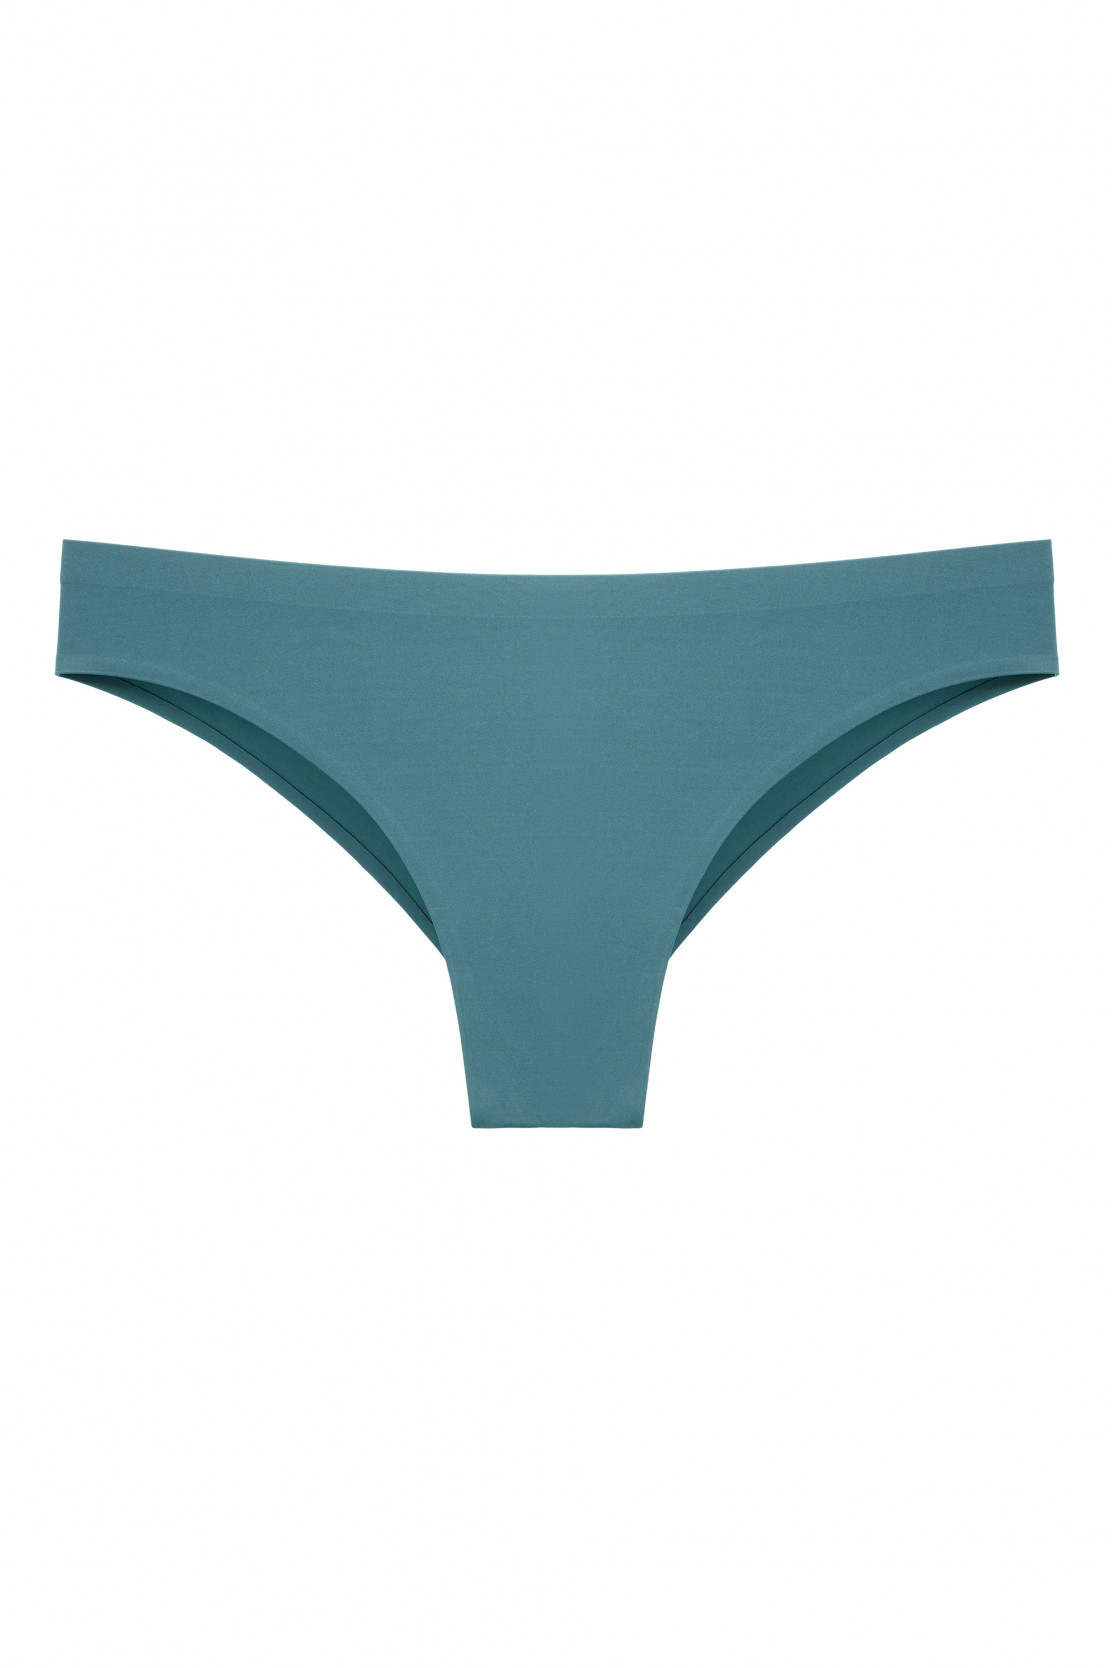 Flirtitude Juniors Cheeky Panty, Color: Sheer Turquoise - JCPenney